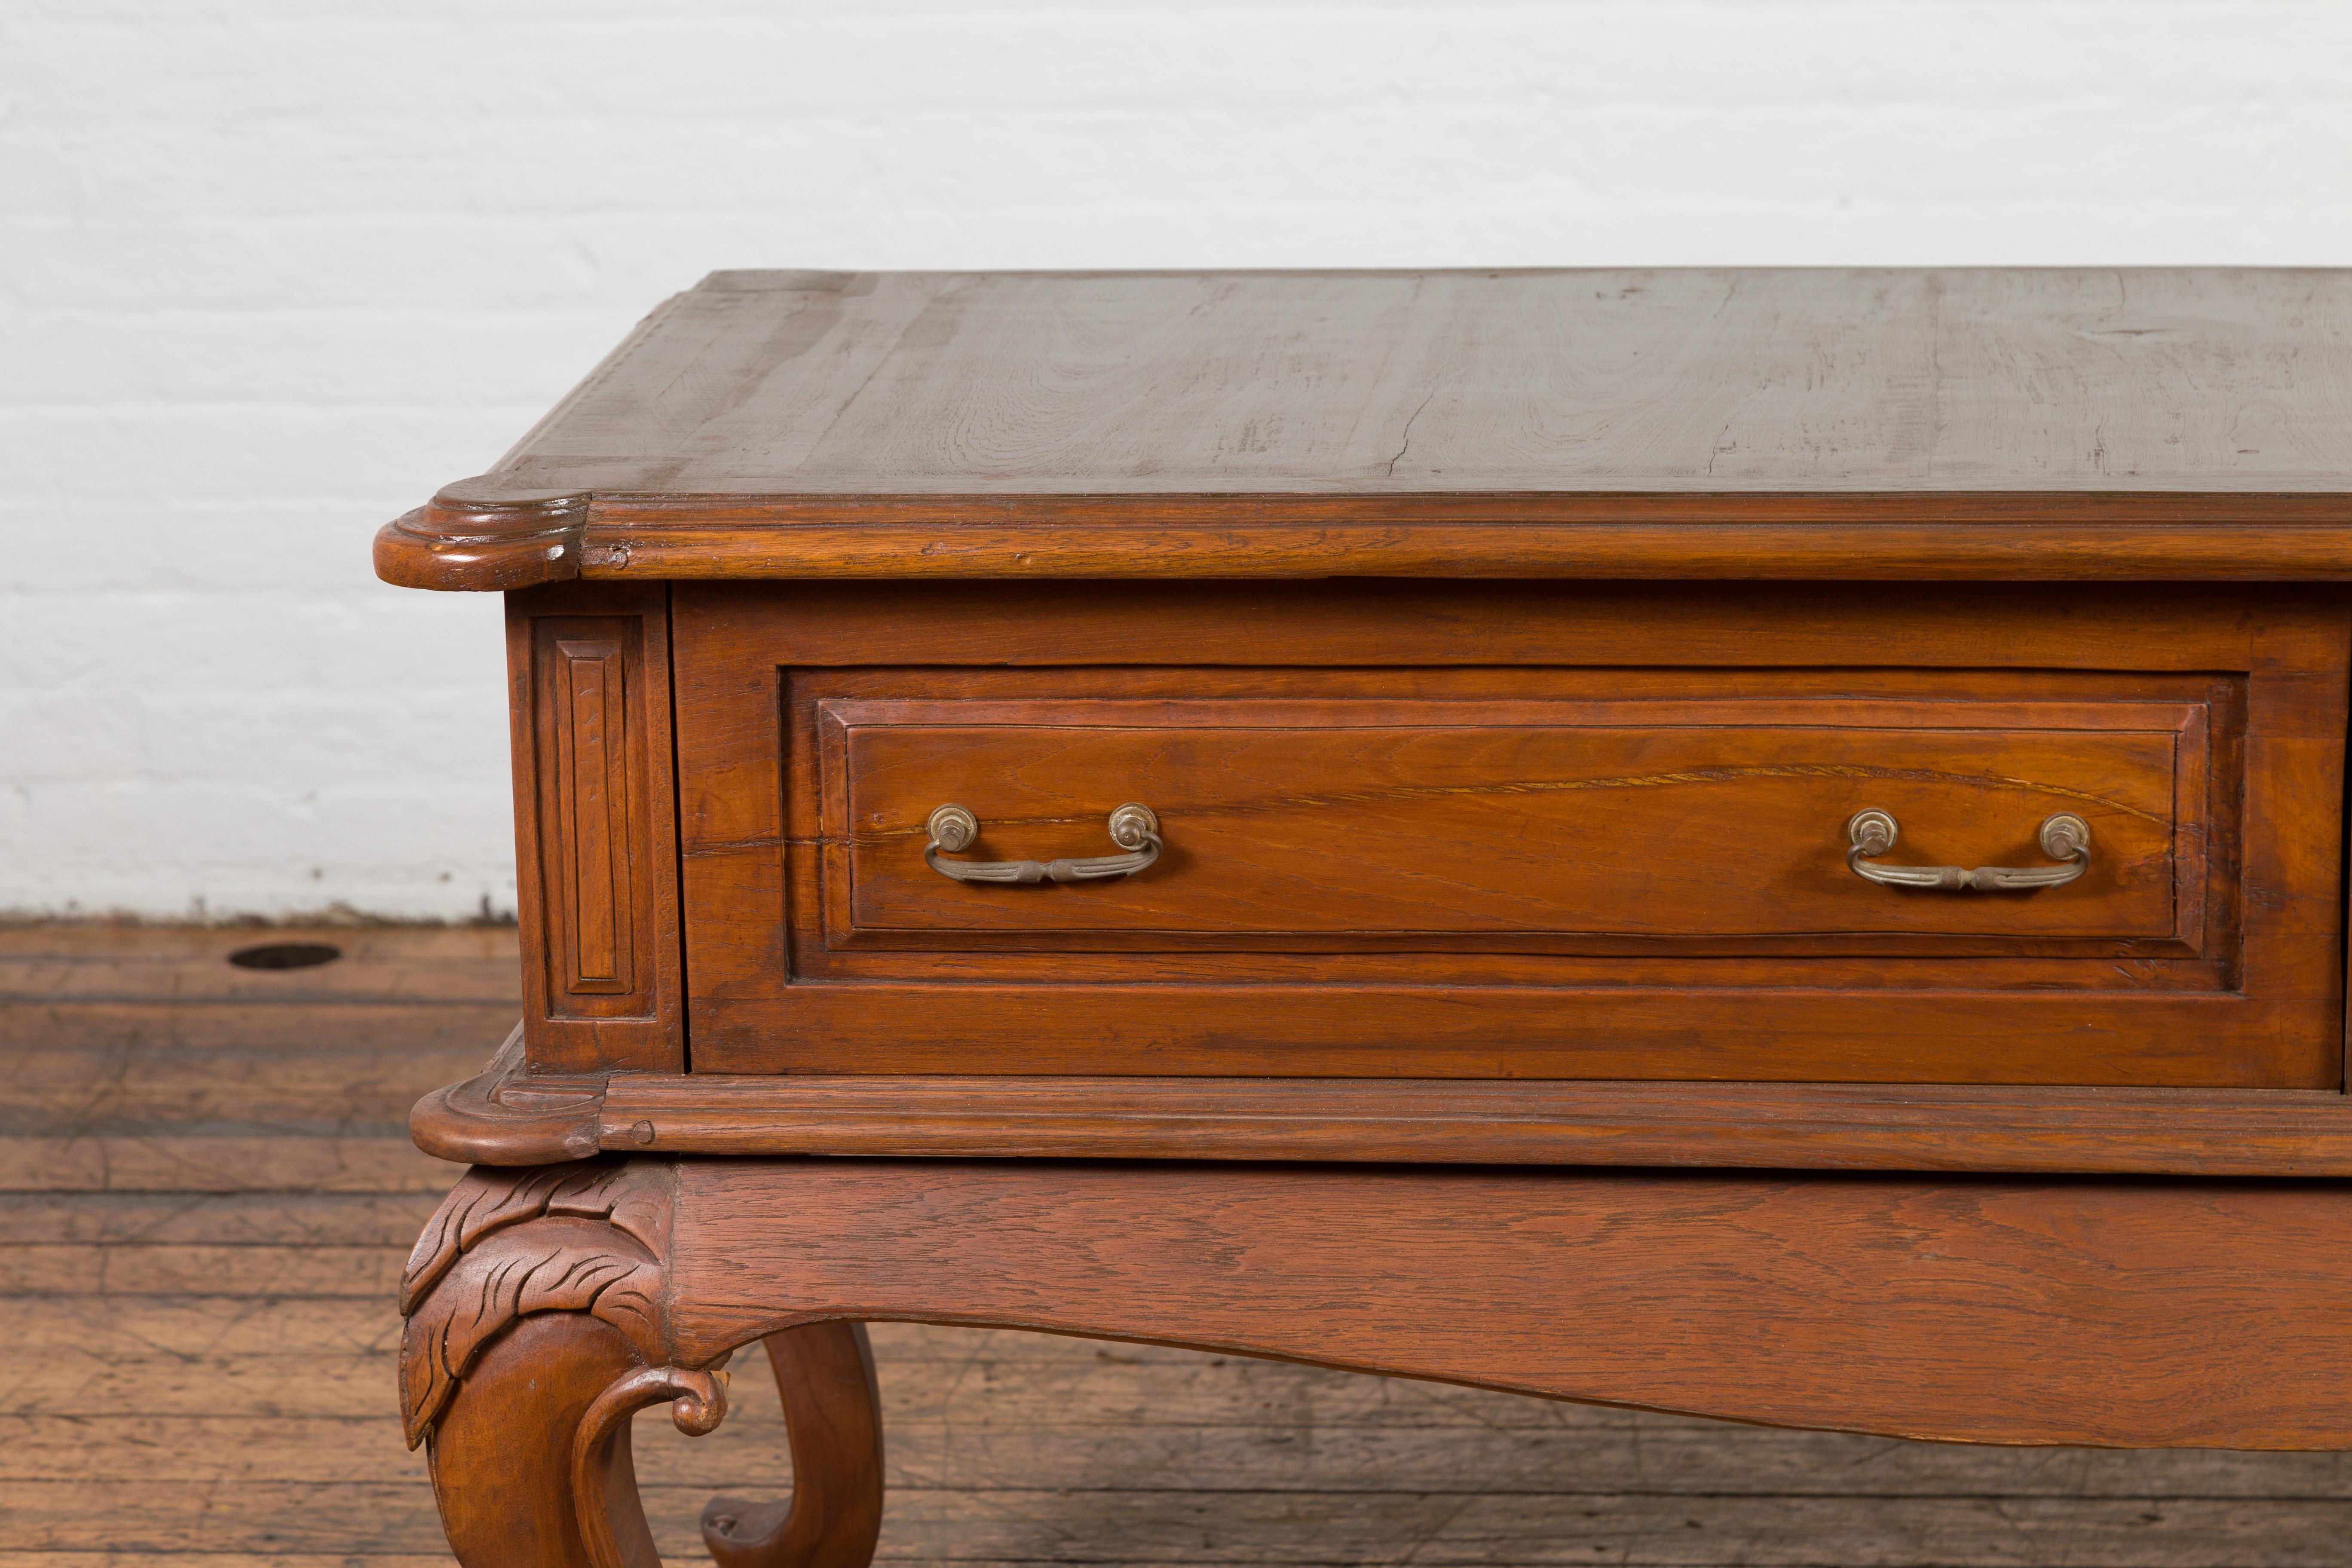 Wood Dutch Colonial Early 20th Century Low Table with Two Drawers and Cabriole Legs For Sale